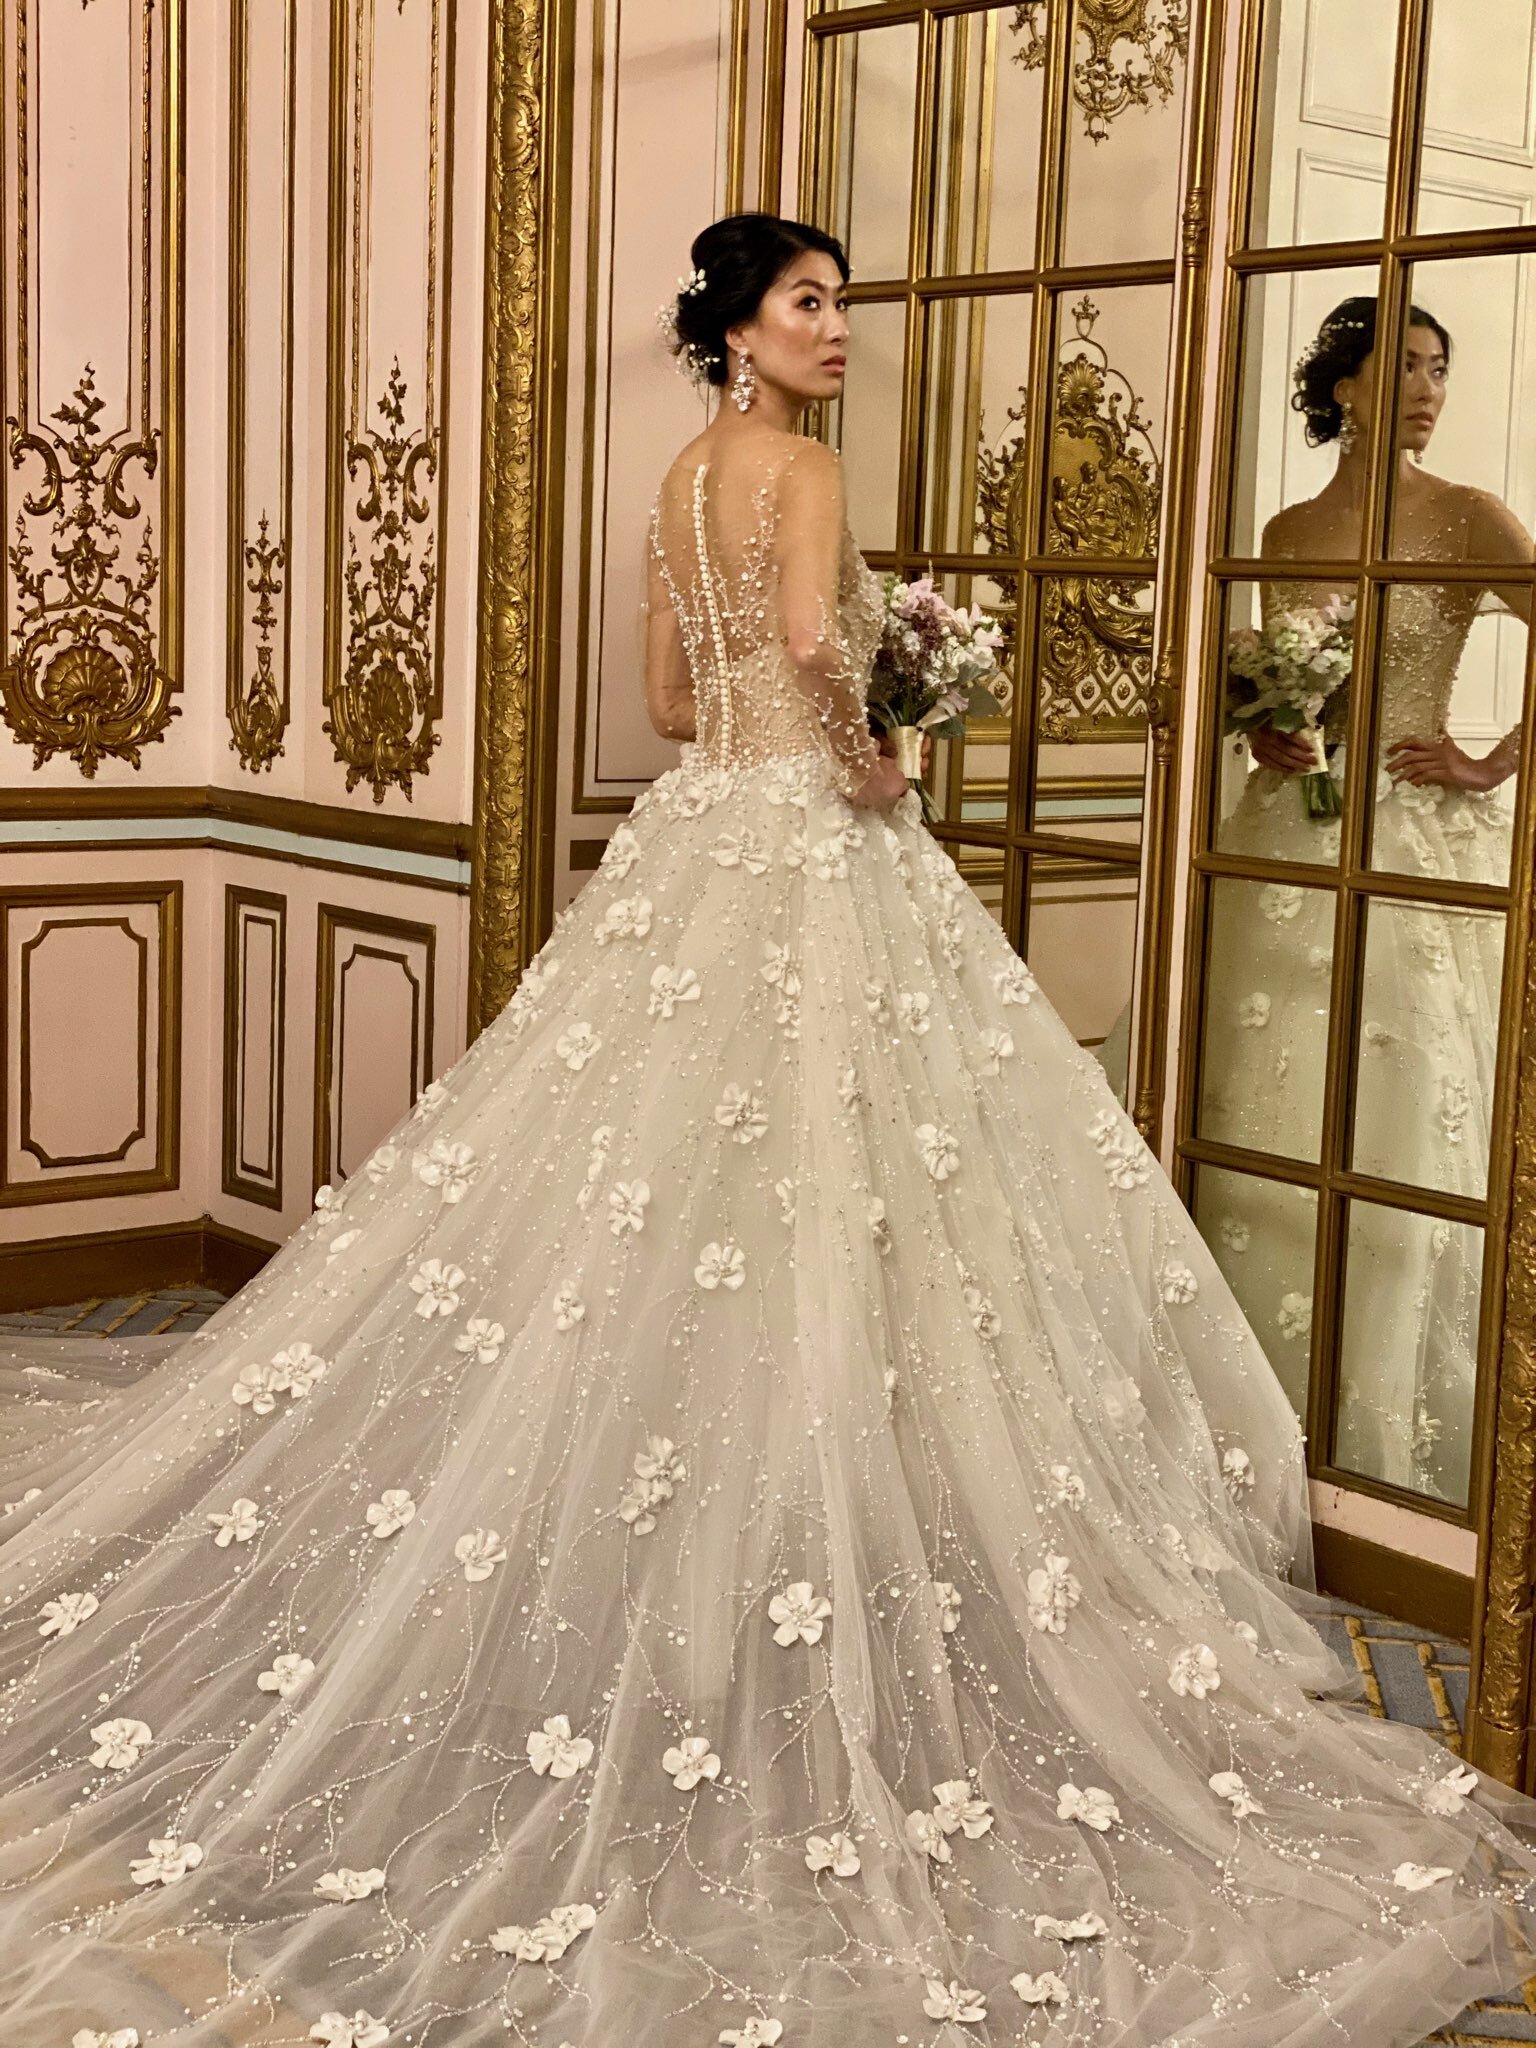 Princess Wedding Dresses: 18 Styles For FairyTale Celebration | Princess  wedding dresses, Wedding dress guide, Wedding dresses lace